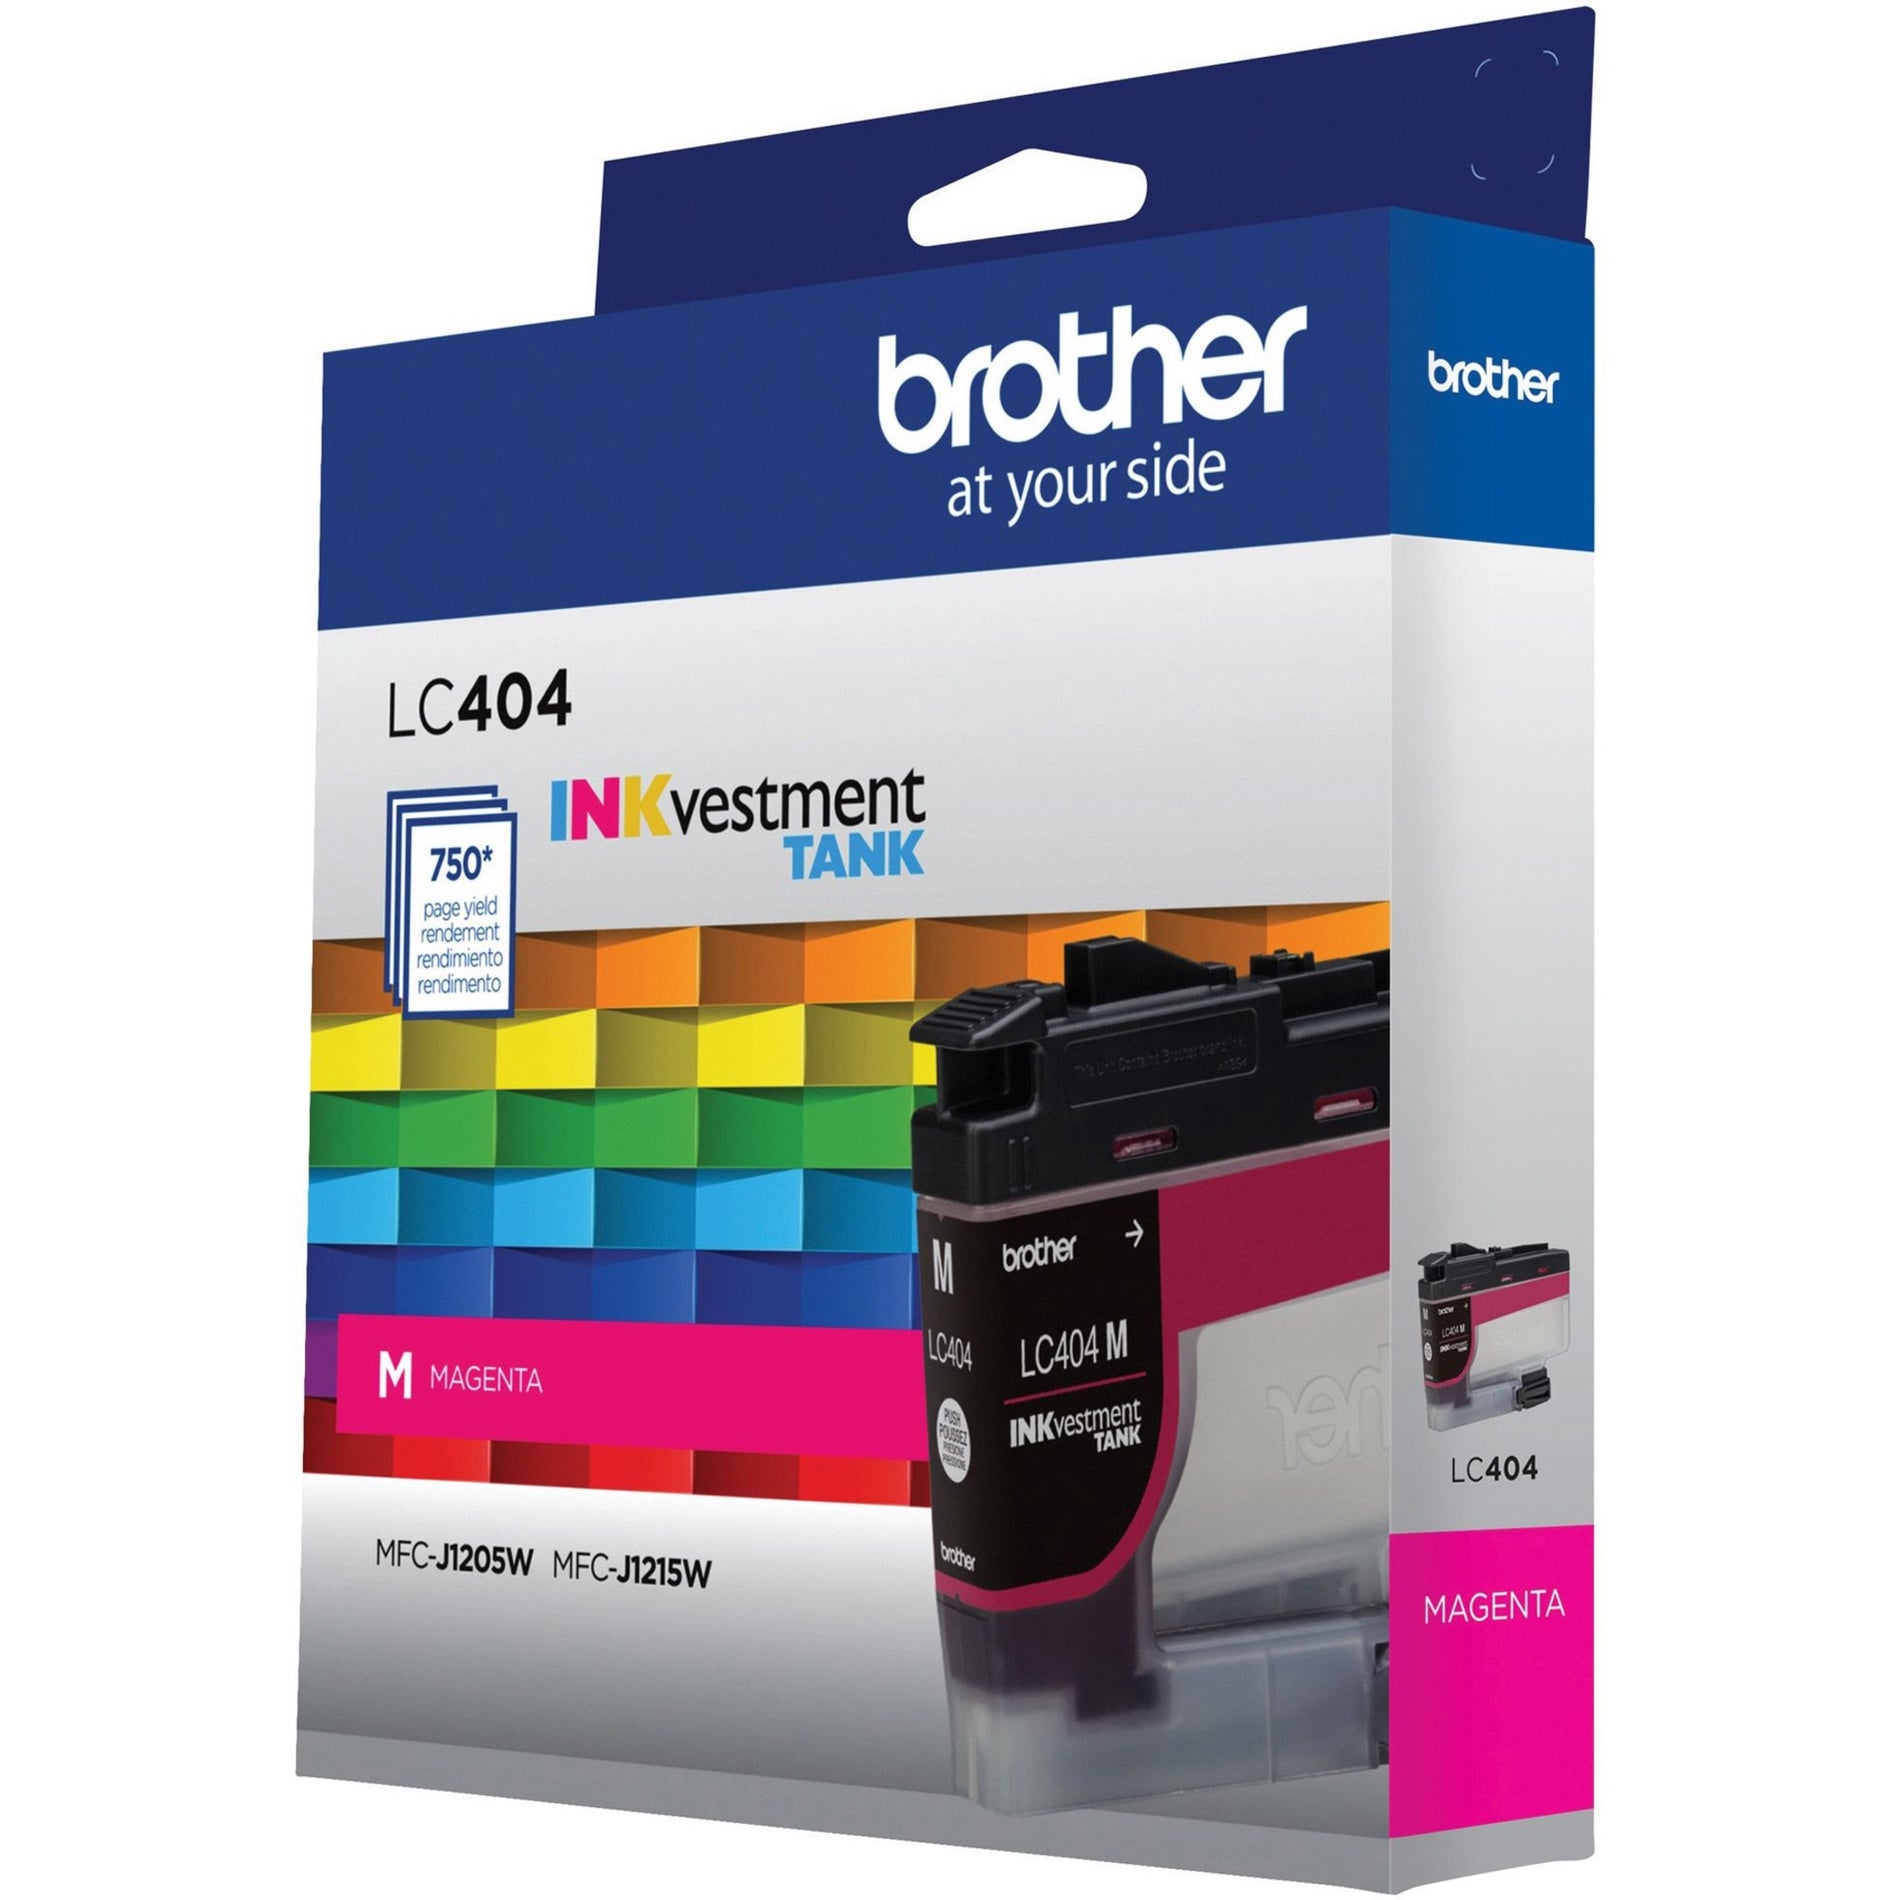 Brother LC404MS INKvestment Tank Ink Cartridge, Magenta, 750 Pages Yield